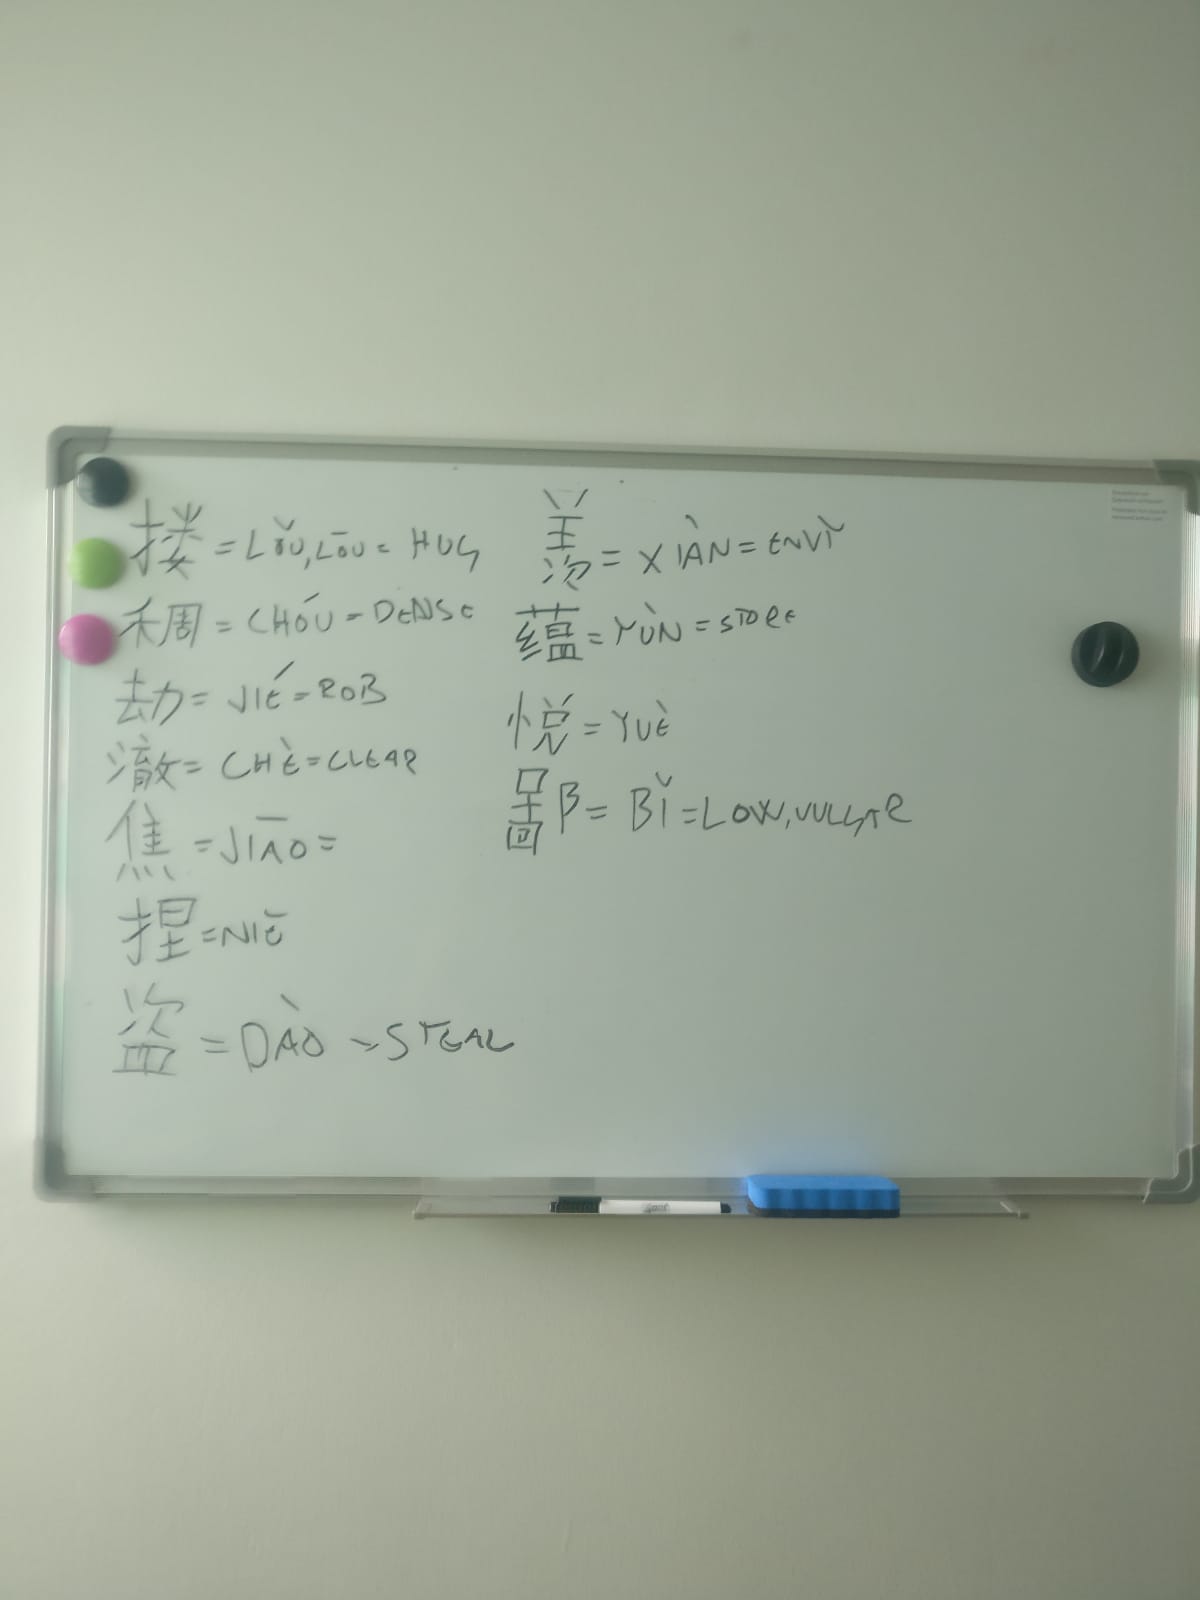 chinese characters on a white board